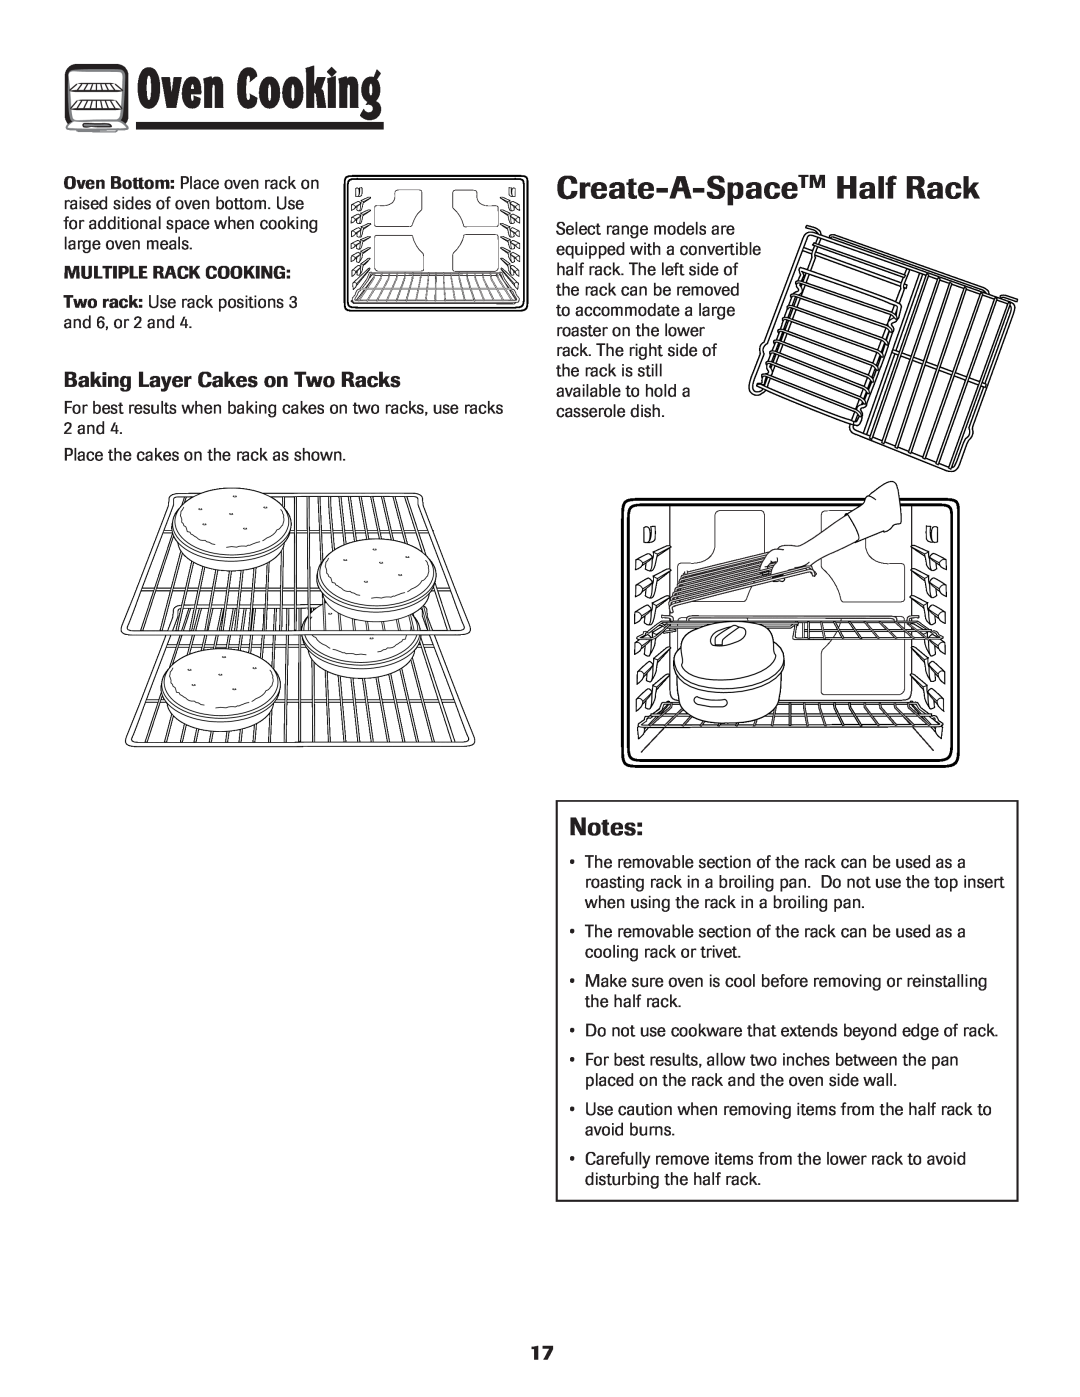 Maytag MGR5775QDW manual Create-A-SpaceTM Half Rack, Baking Layer Cakes on Two Racks, Oven Cooking 